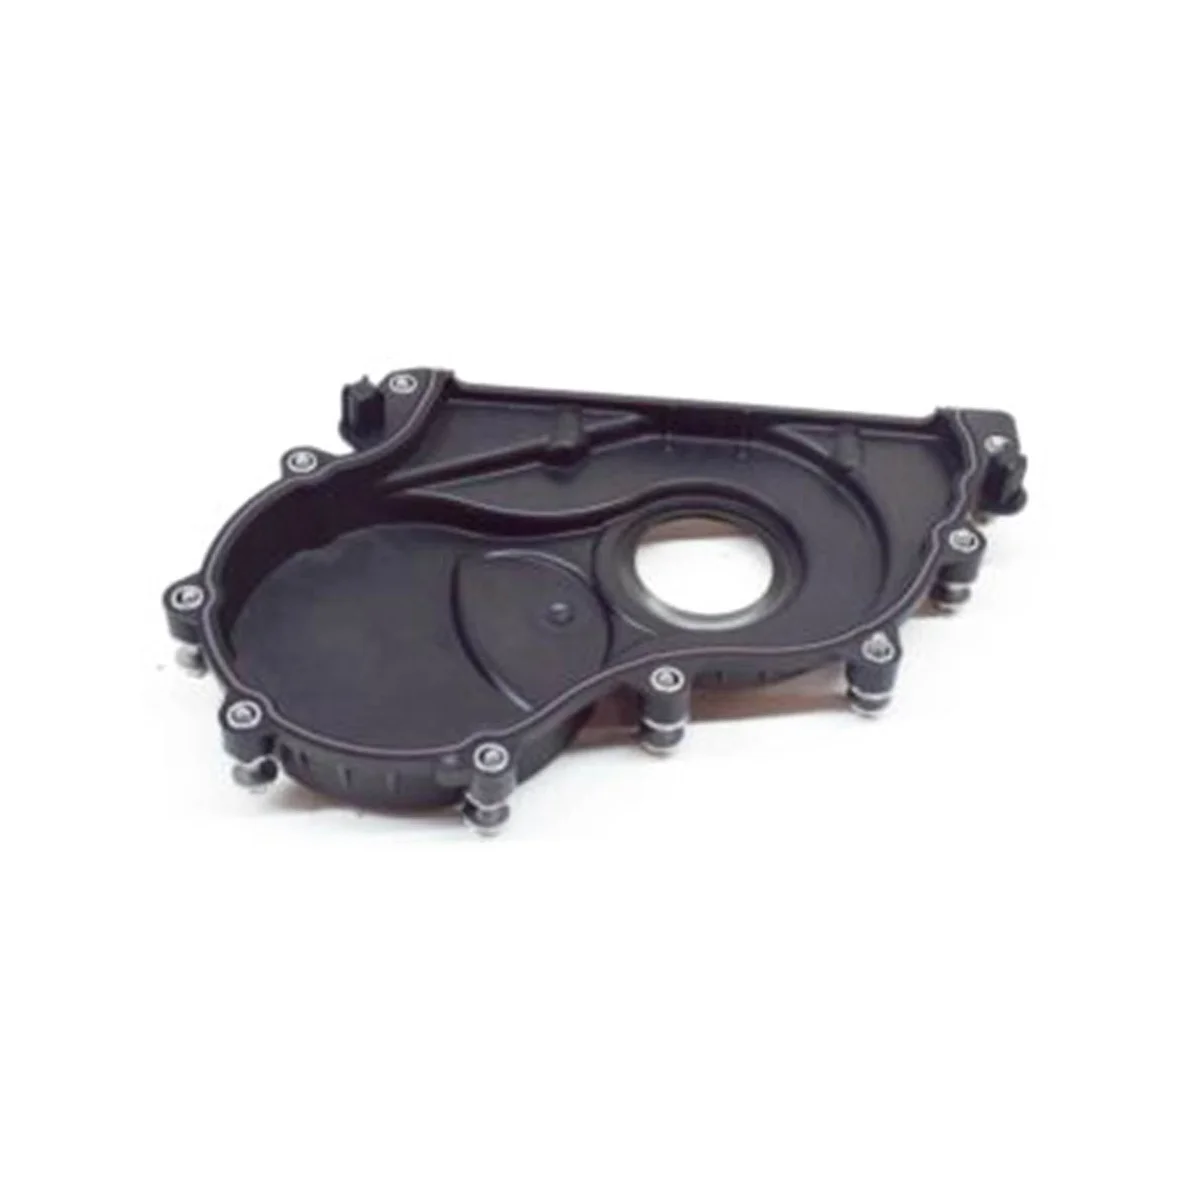 

Camshaft Oil Timing Cover Plate Kit Engine Upper Timing Chain Cover Gasket for BMW 1/2/3 Series I8 F20 F22 11148512597